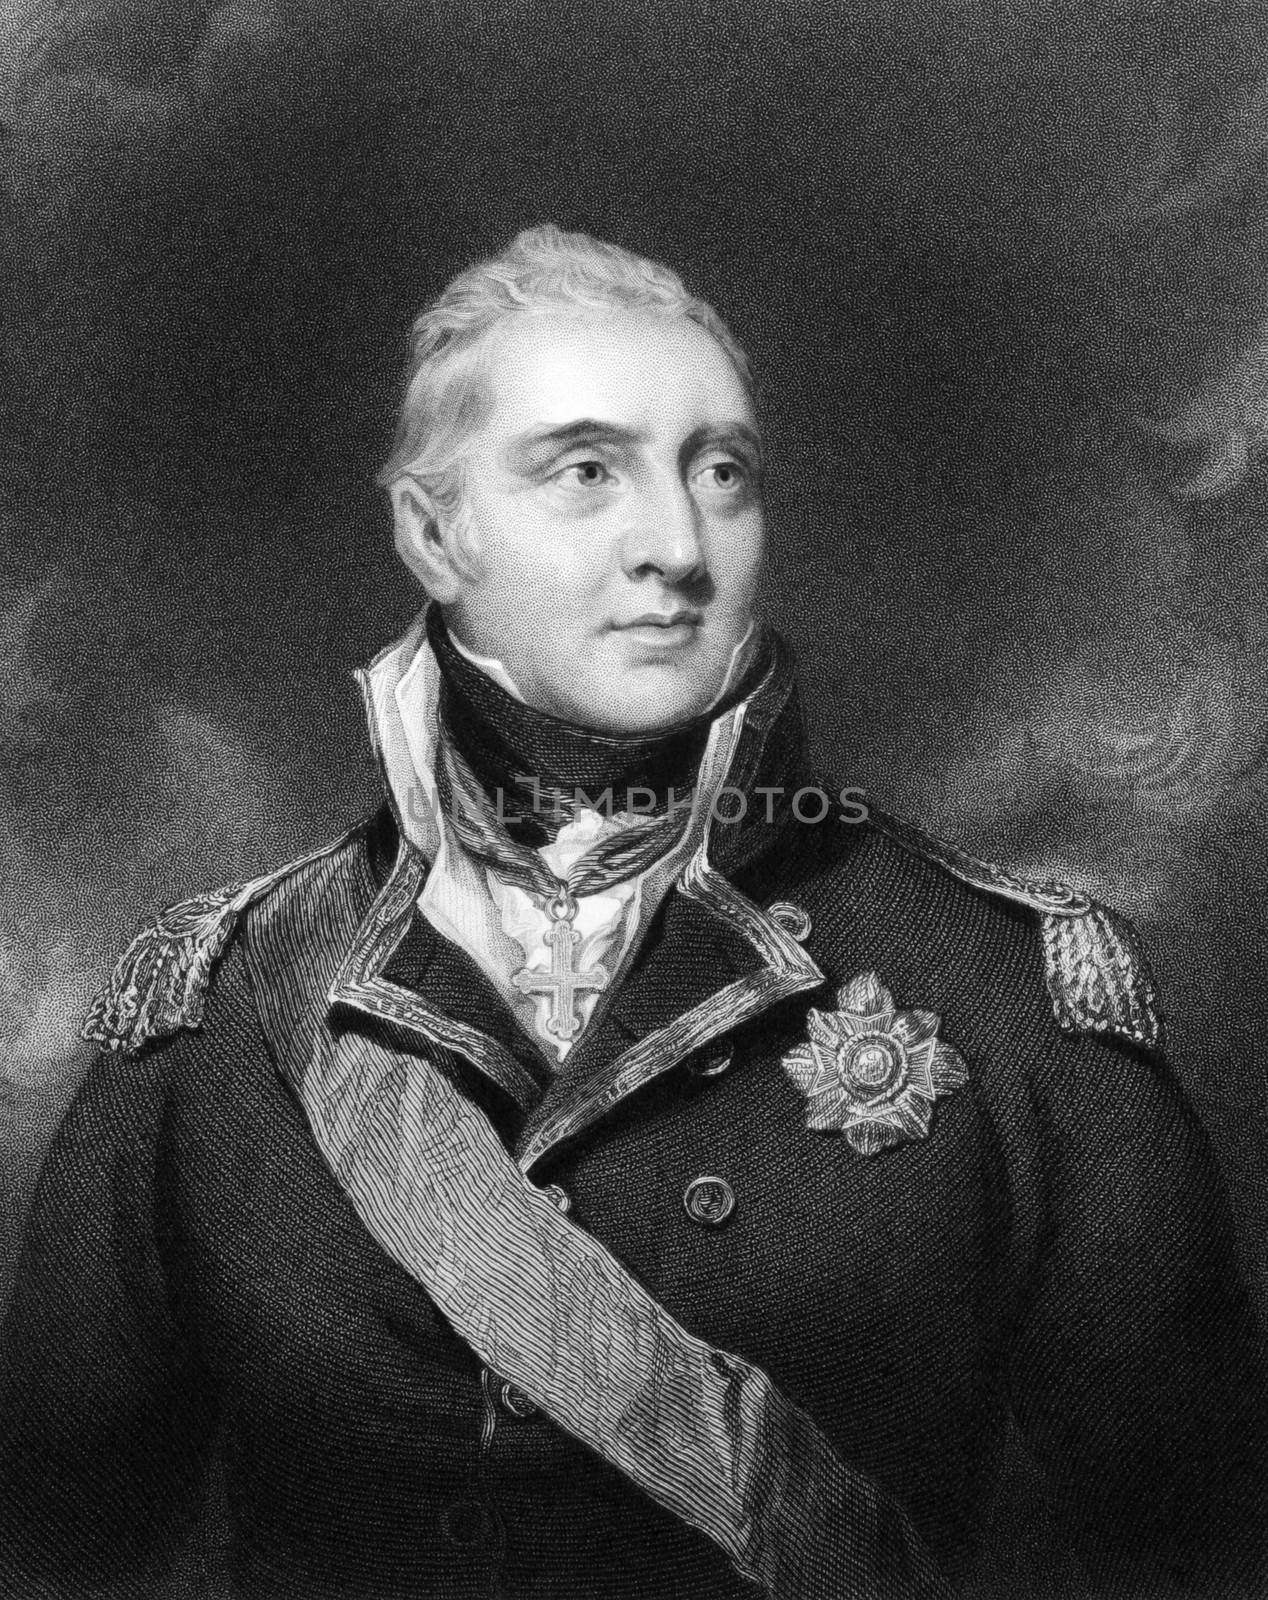 Edward Pellew, 1st Viscount Exmouth (1757-1833) on engraving from 1834.  British naval officer. Engraved by H.Robinson and published in ''Portraits of Illustrious Personages of Great Britain'',UK,1834.